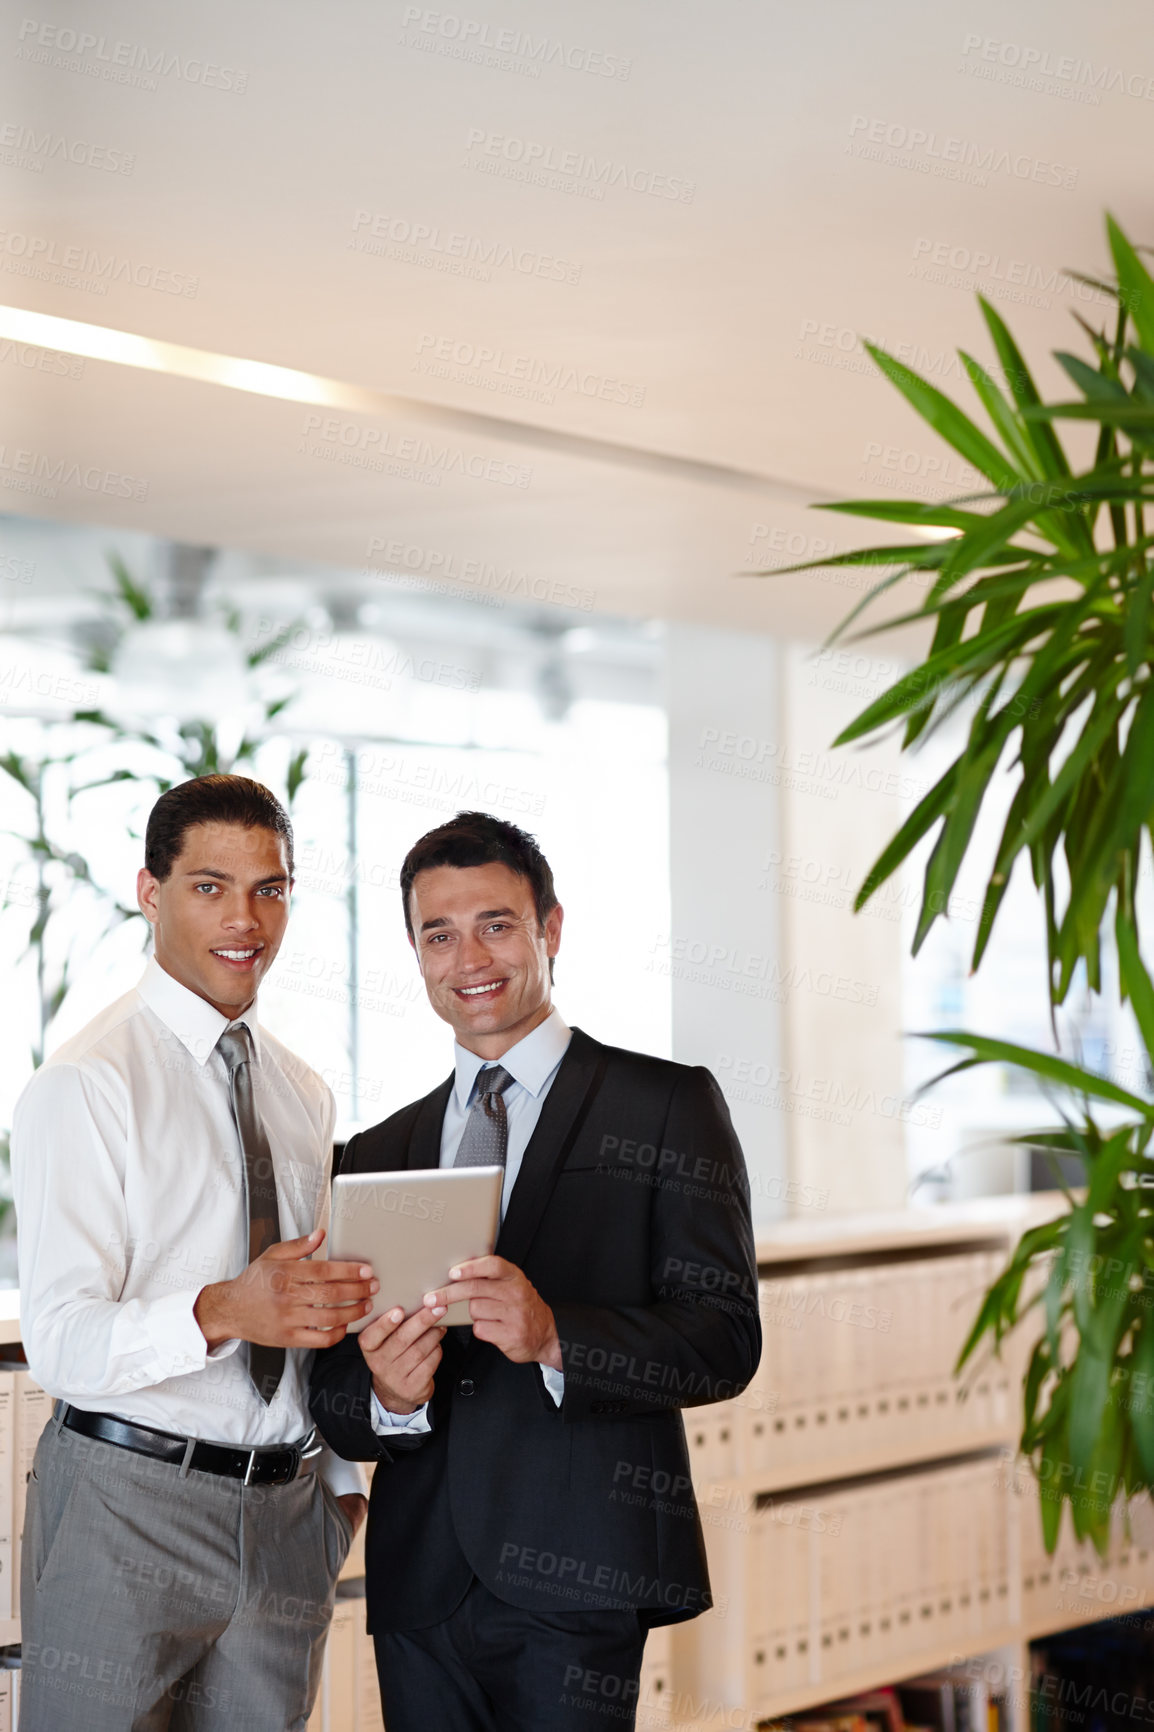 Buy stock photo Two suit-clad businessmen working together while in the office